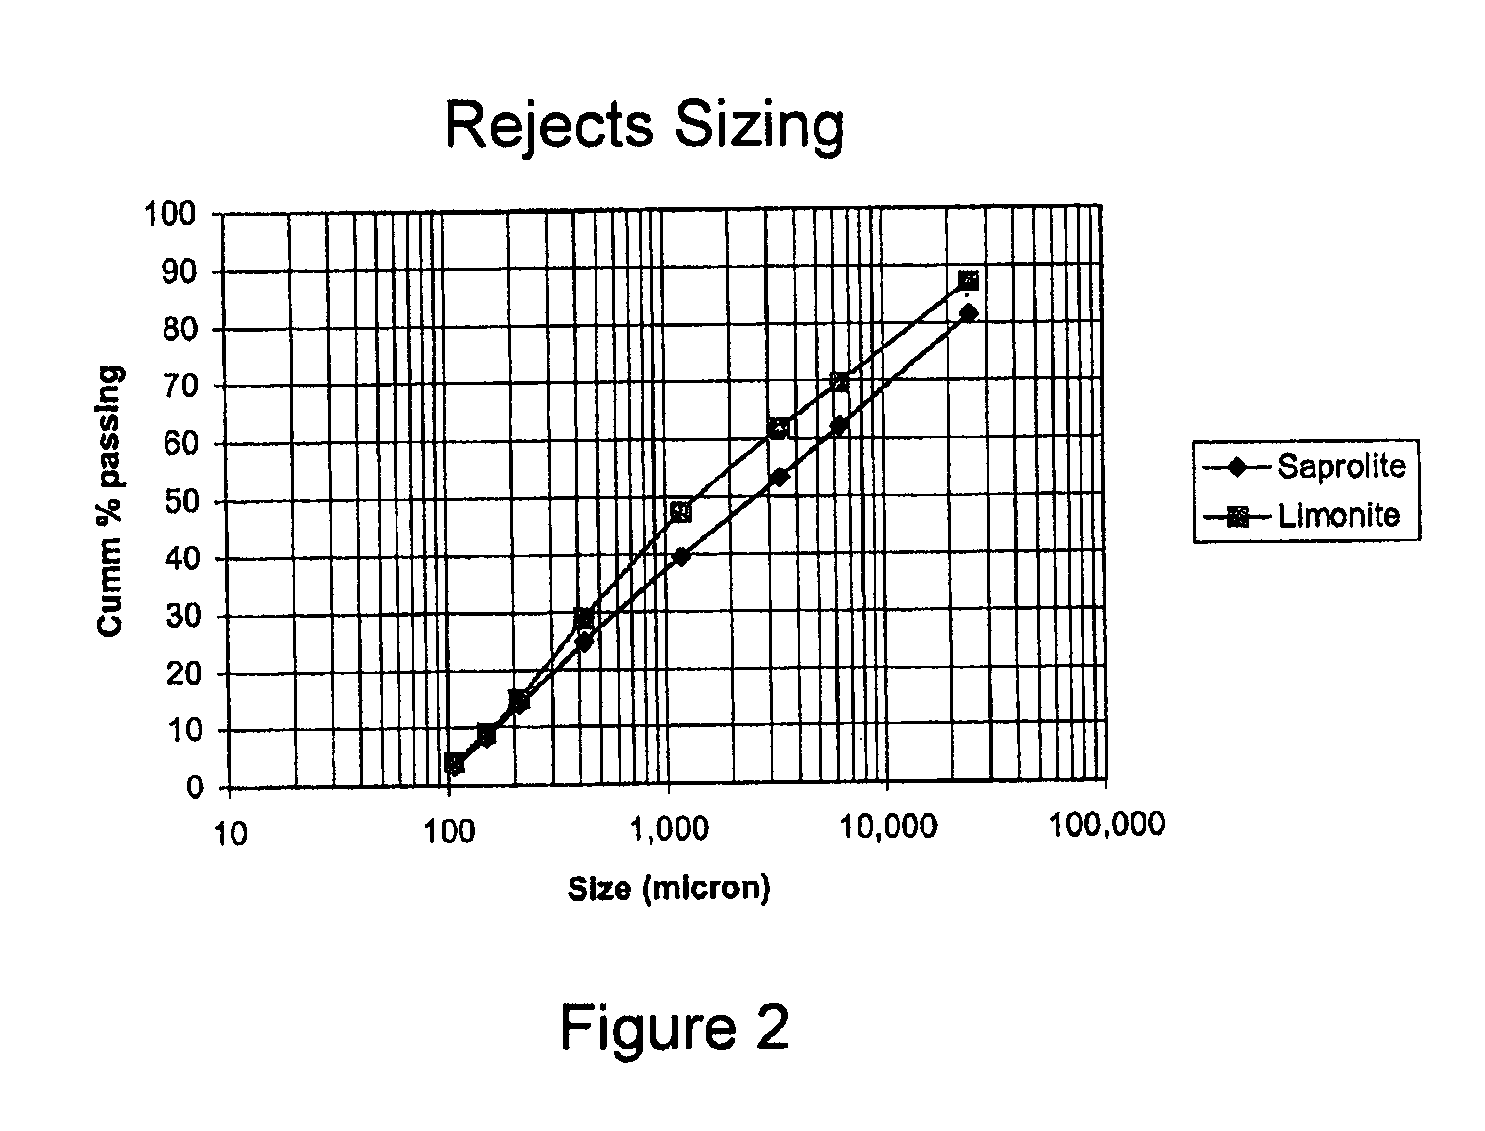 Process for recovery of nickel and cobalt by heap leaching of low grade nickel or cobalt containing material